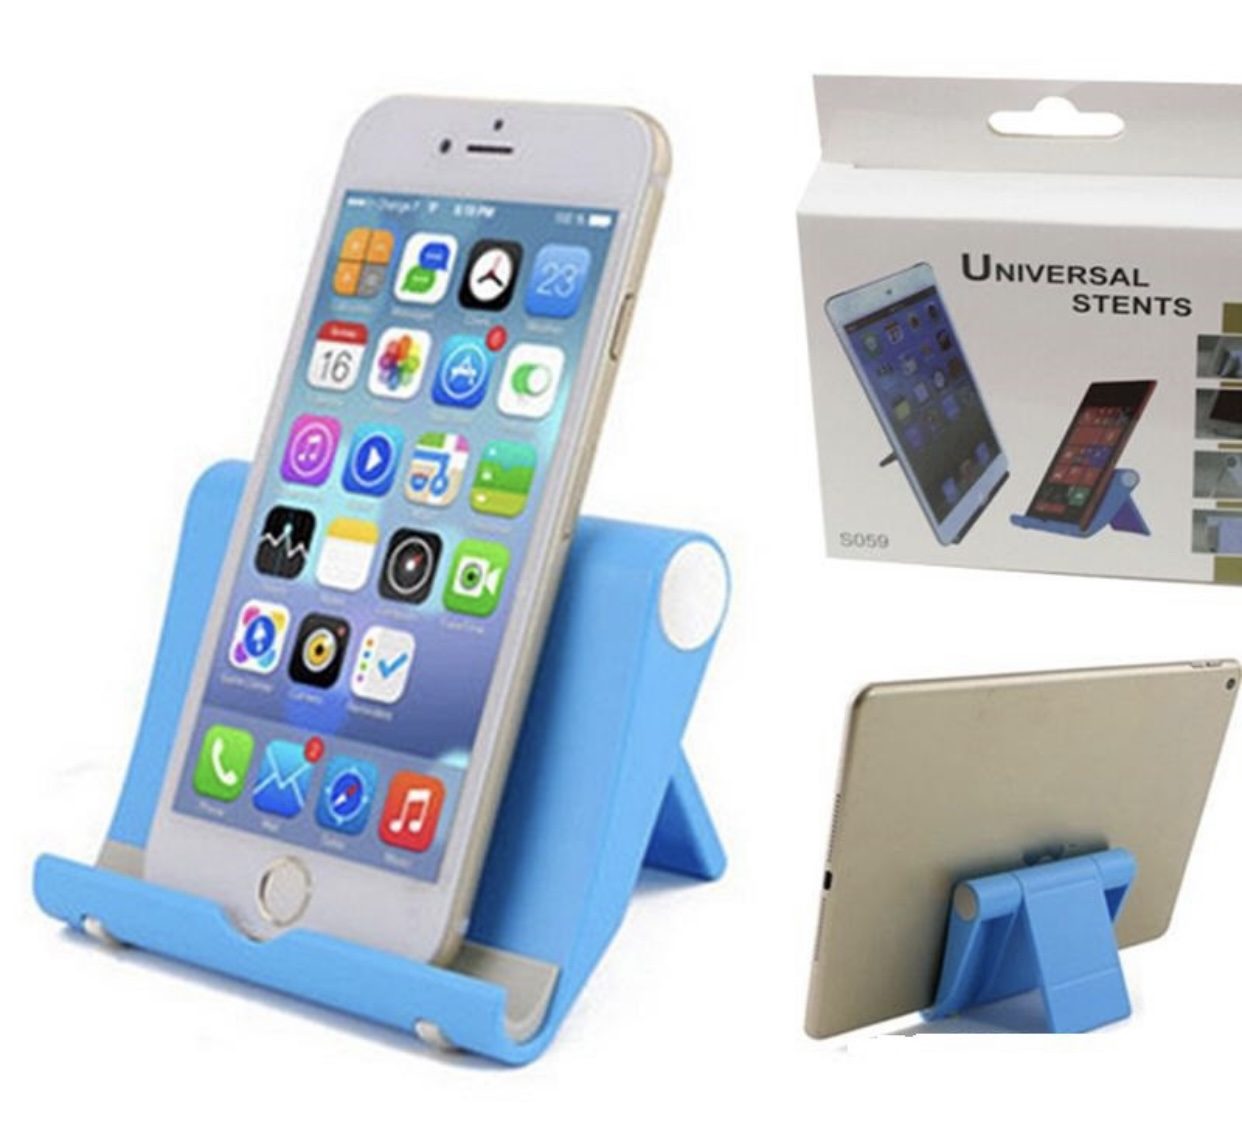 Universal Stents S059 For Mobiles And Tablets Stand Holder